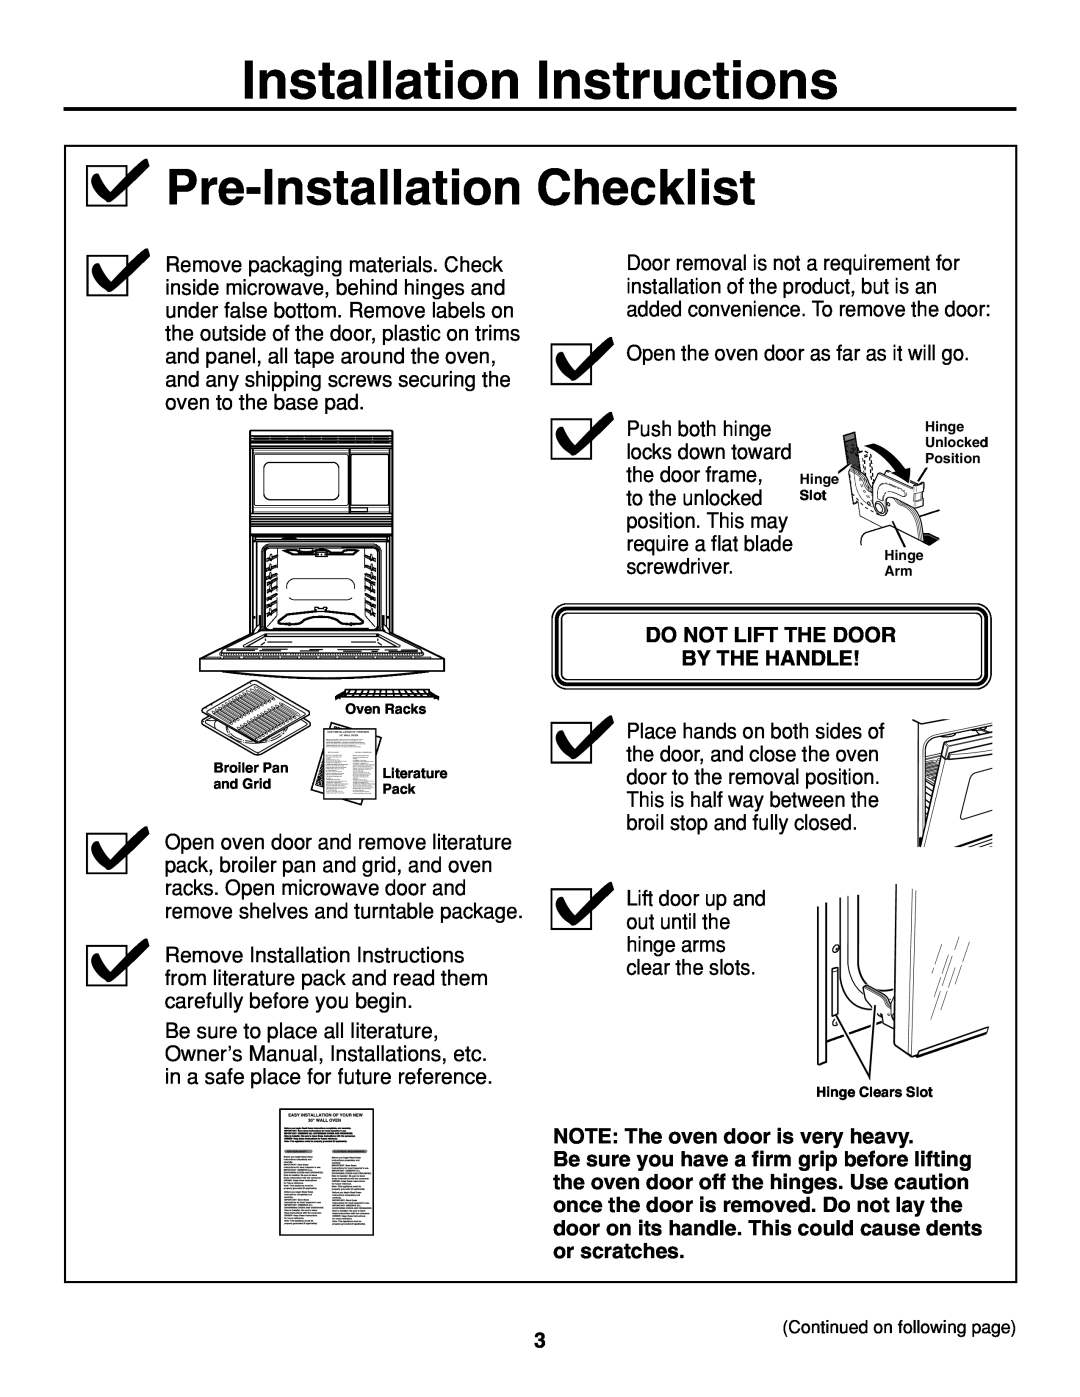 GE JTP86 Pre-Installation Checklist, Installation Instructions, Do Not Lift The Door By The Handle 